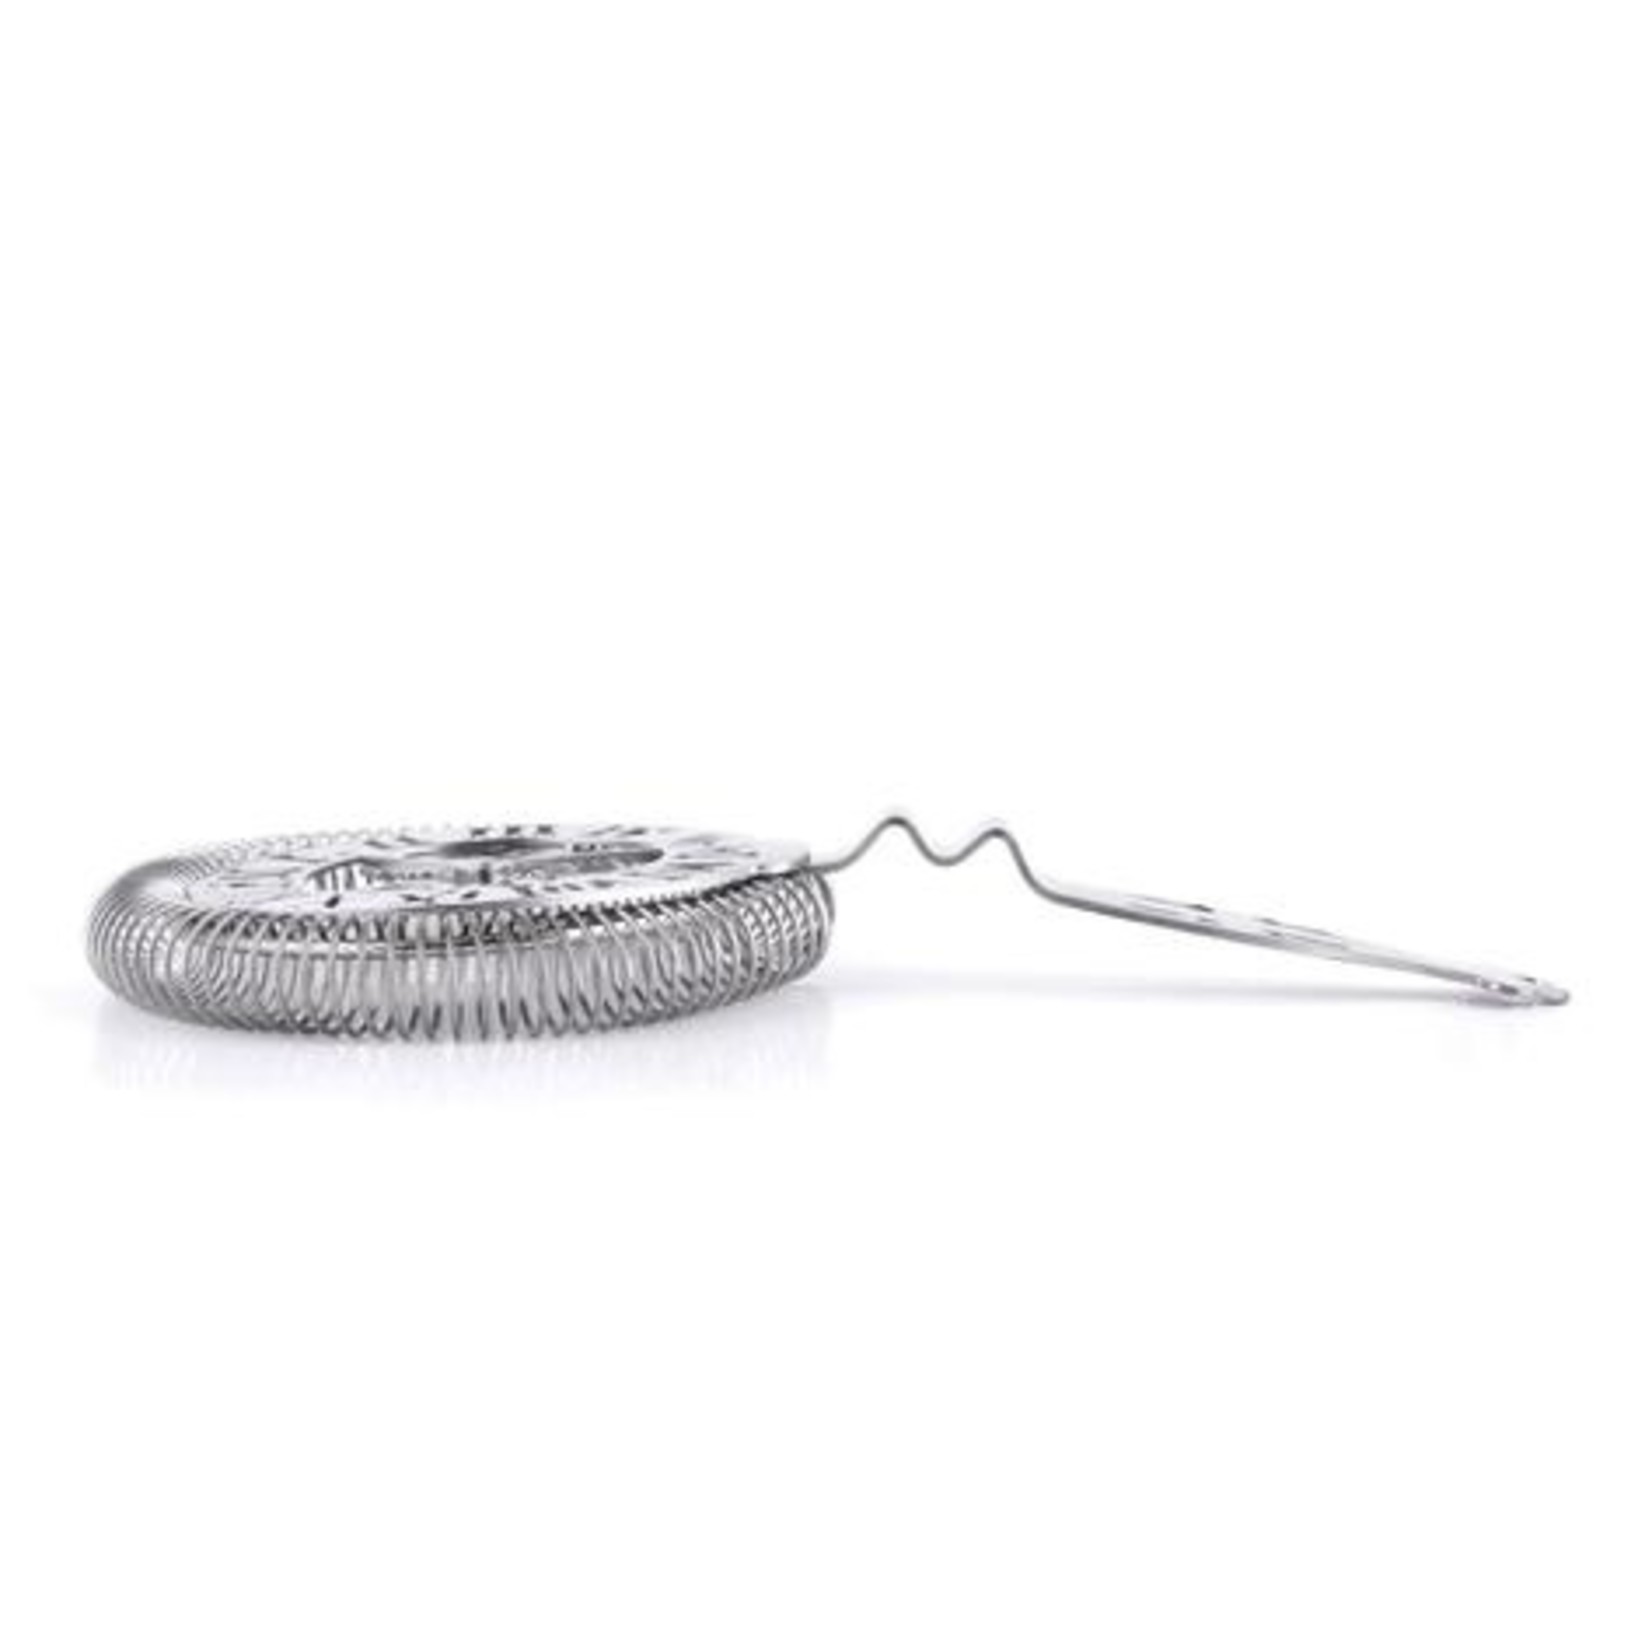 Gears Cocktail Strainer